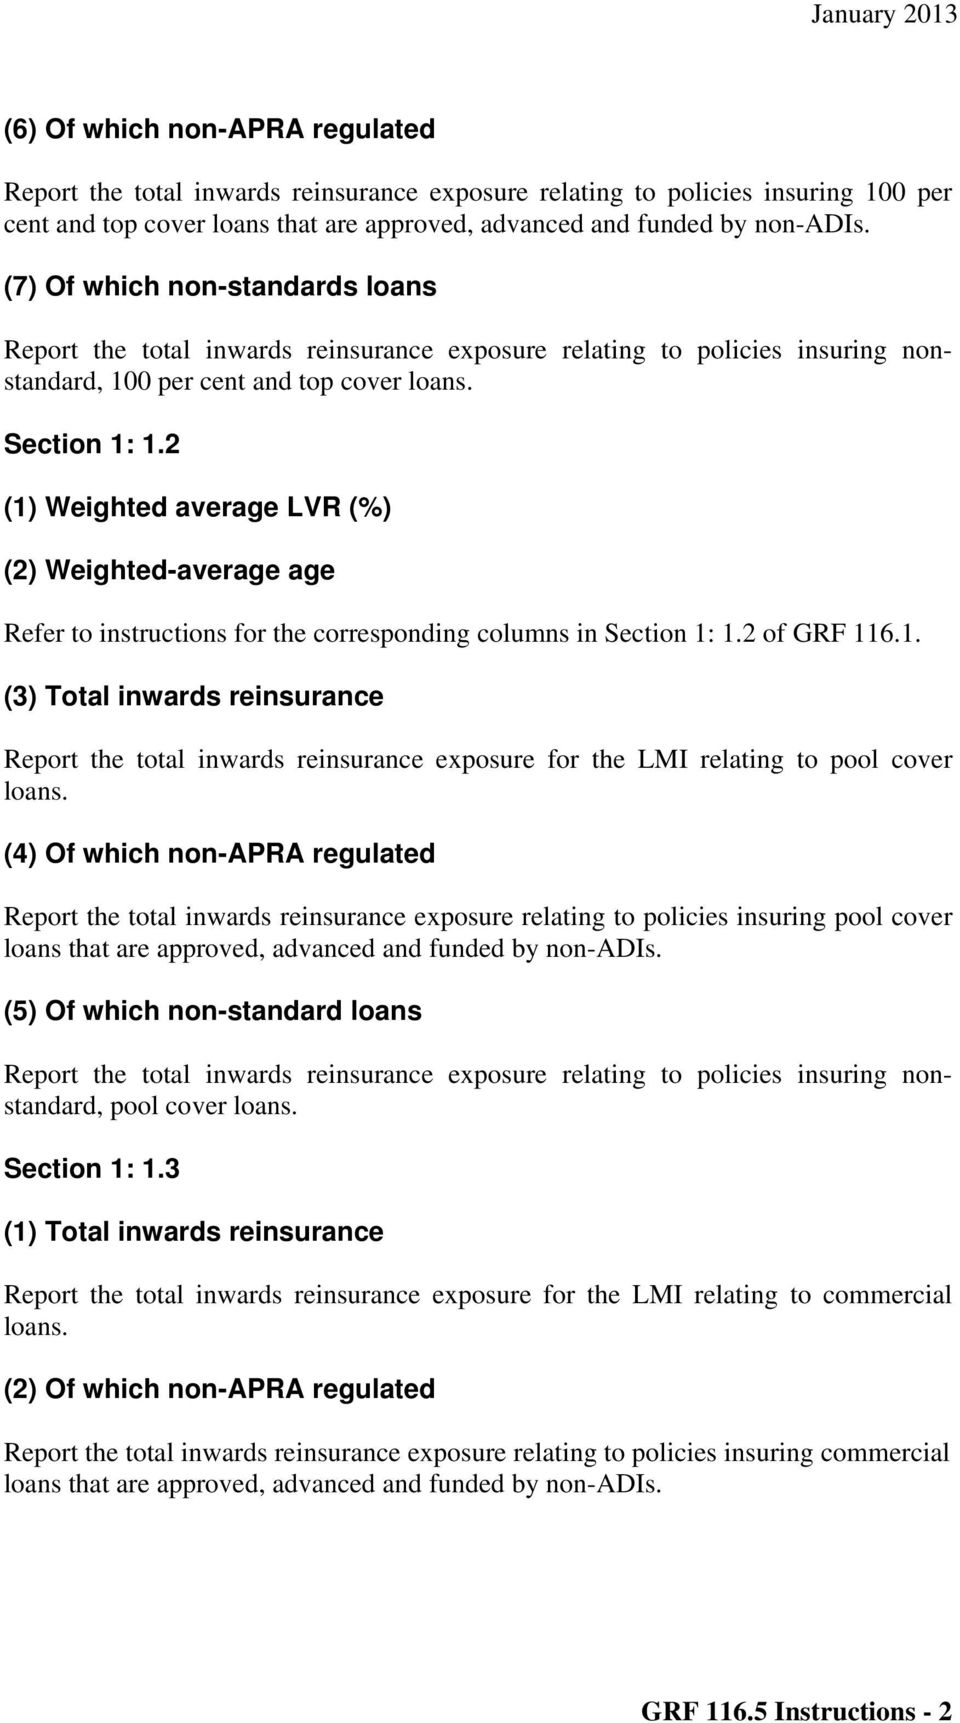 2 (1) Weighted average LVR (%) (2) Weighted-average age Refer to instructions for the corresponding columns in Section 1: 1.2 of GRF 116.1. (3) Total inwards reinsurance Report the total inwards reinsurance exposure for the LMI relating to pool cover loans.